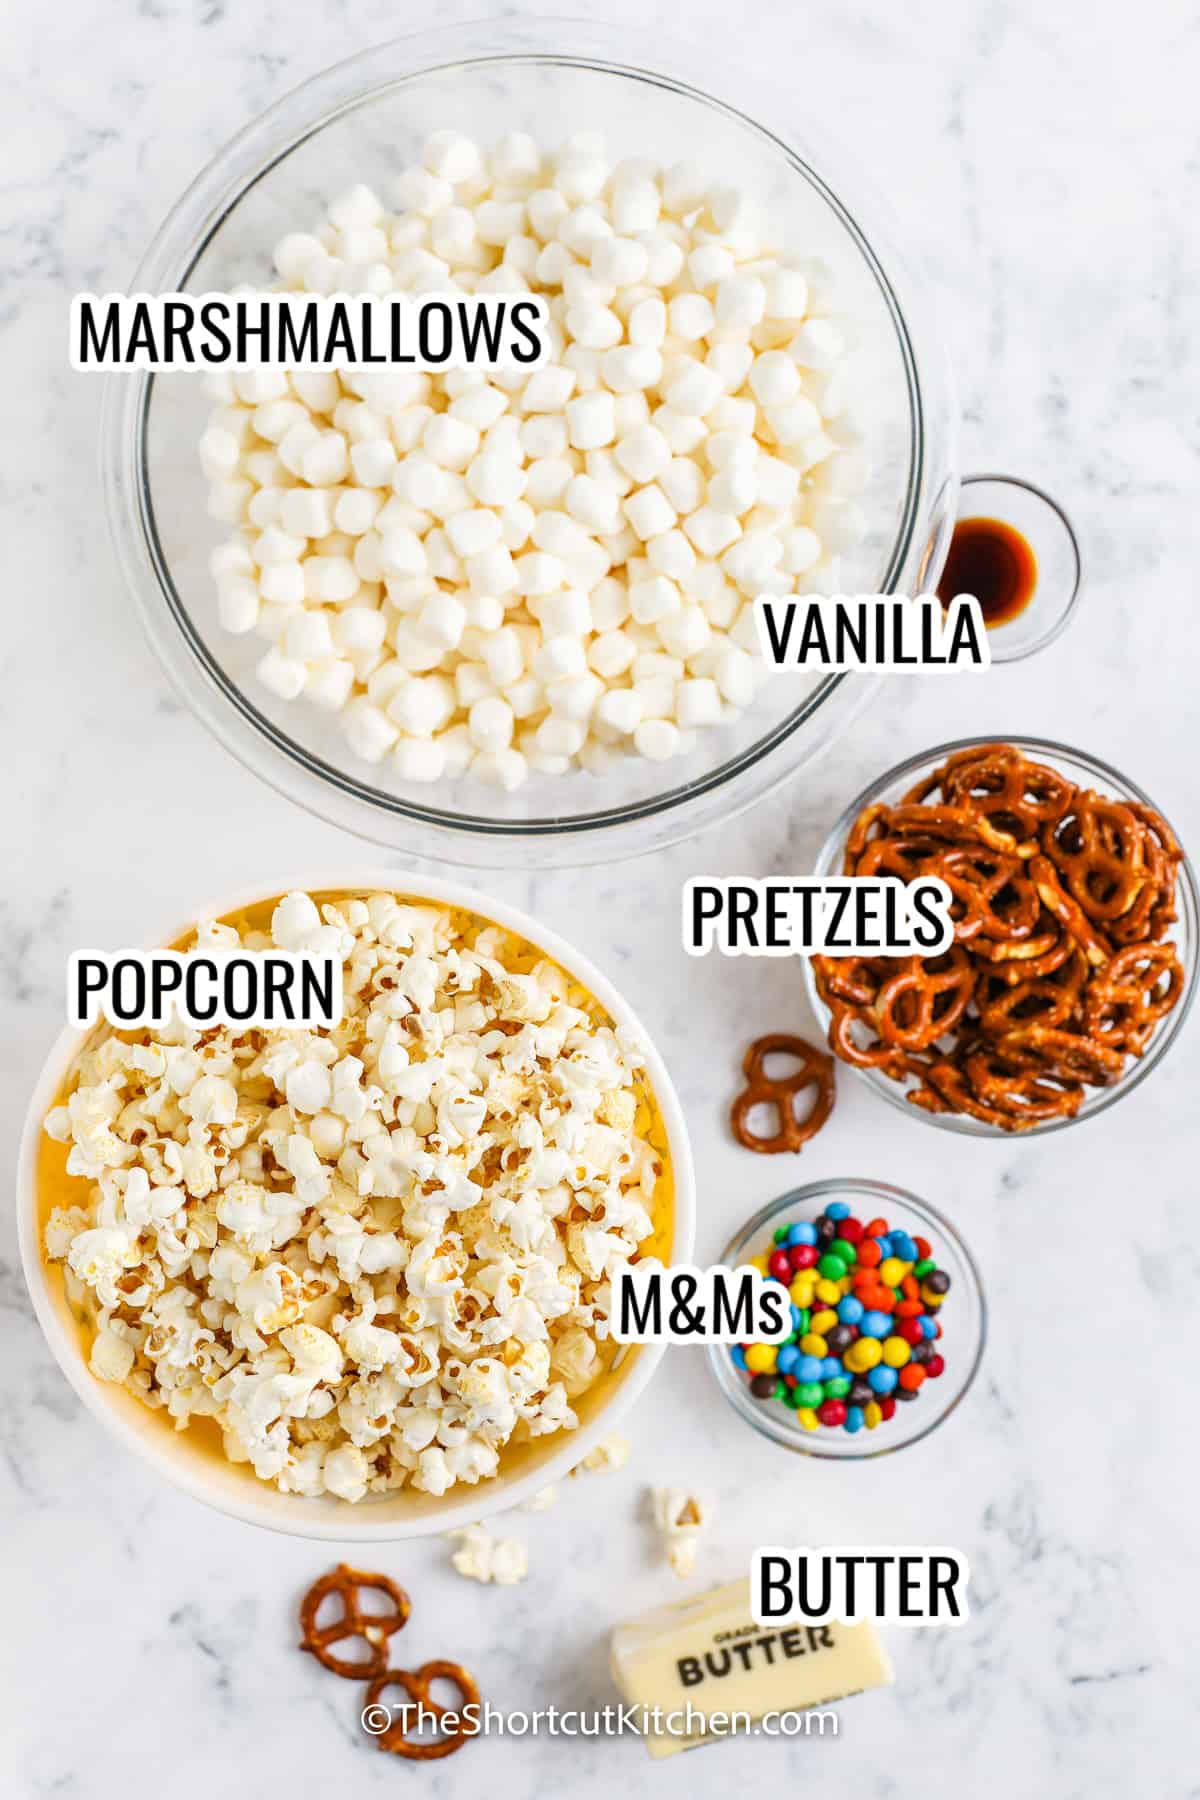 ingredients assembled to make popcorn bars, with labels including popcorn, marshmallows, pretzels, M&Ms, and butter